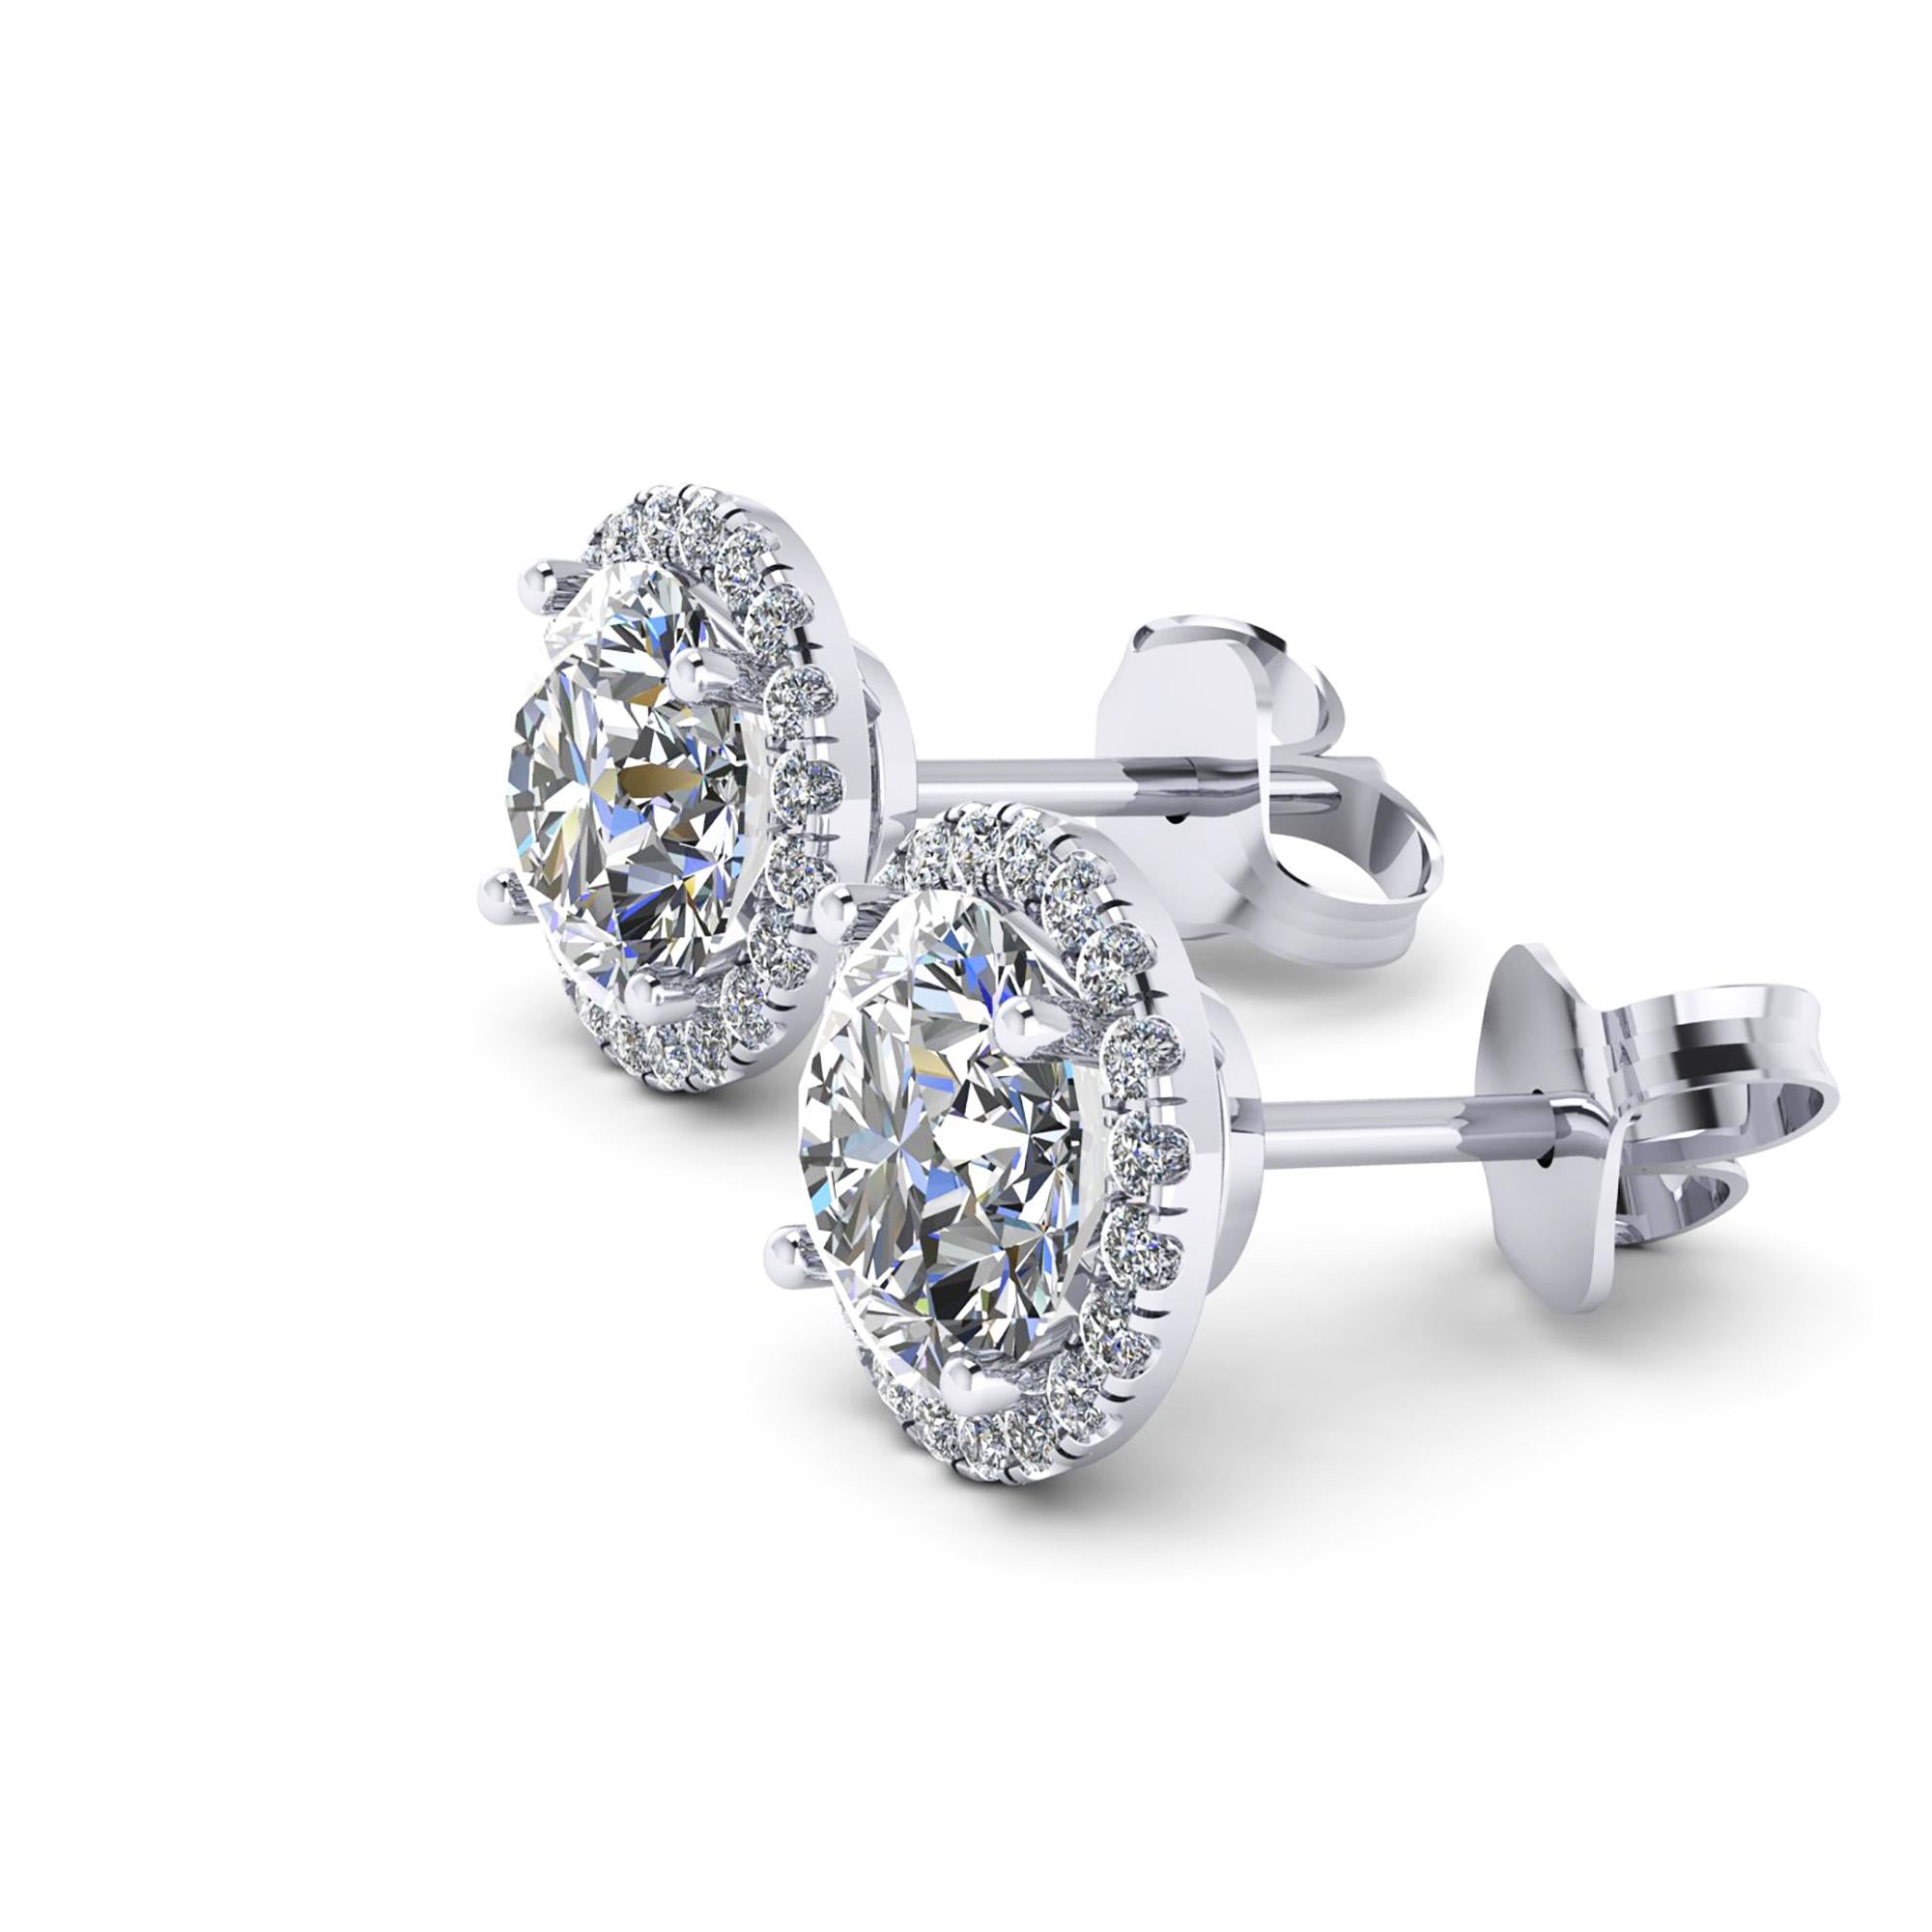 GIA Certified 2.4 Carat Diamond Halo Studs earrings hand made in Platinum, with Screw-Back post,
two brilliant round diamonds, D color, VVS2 and VS2 clarity of 1.07 carat each, GIA Certificate will accompany the earrings, with diamond halos